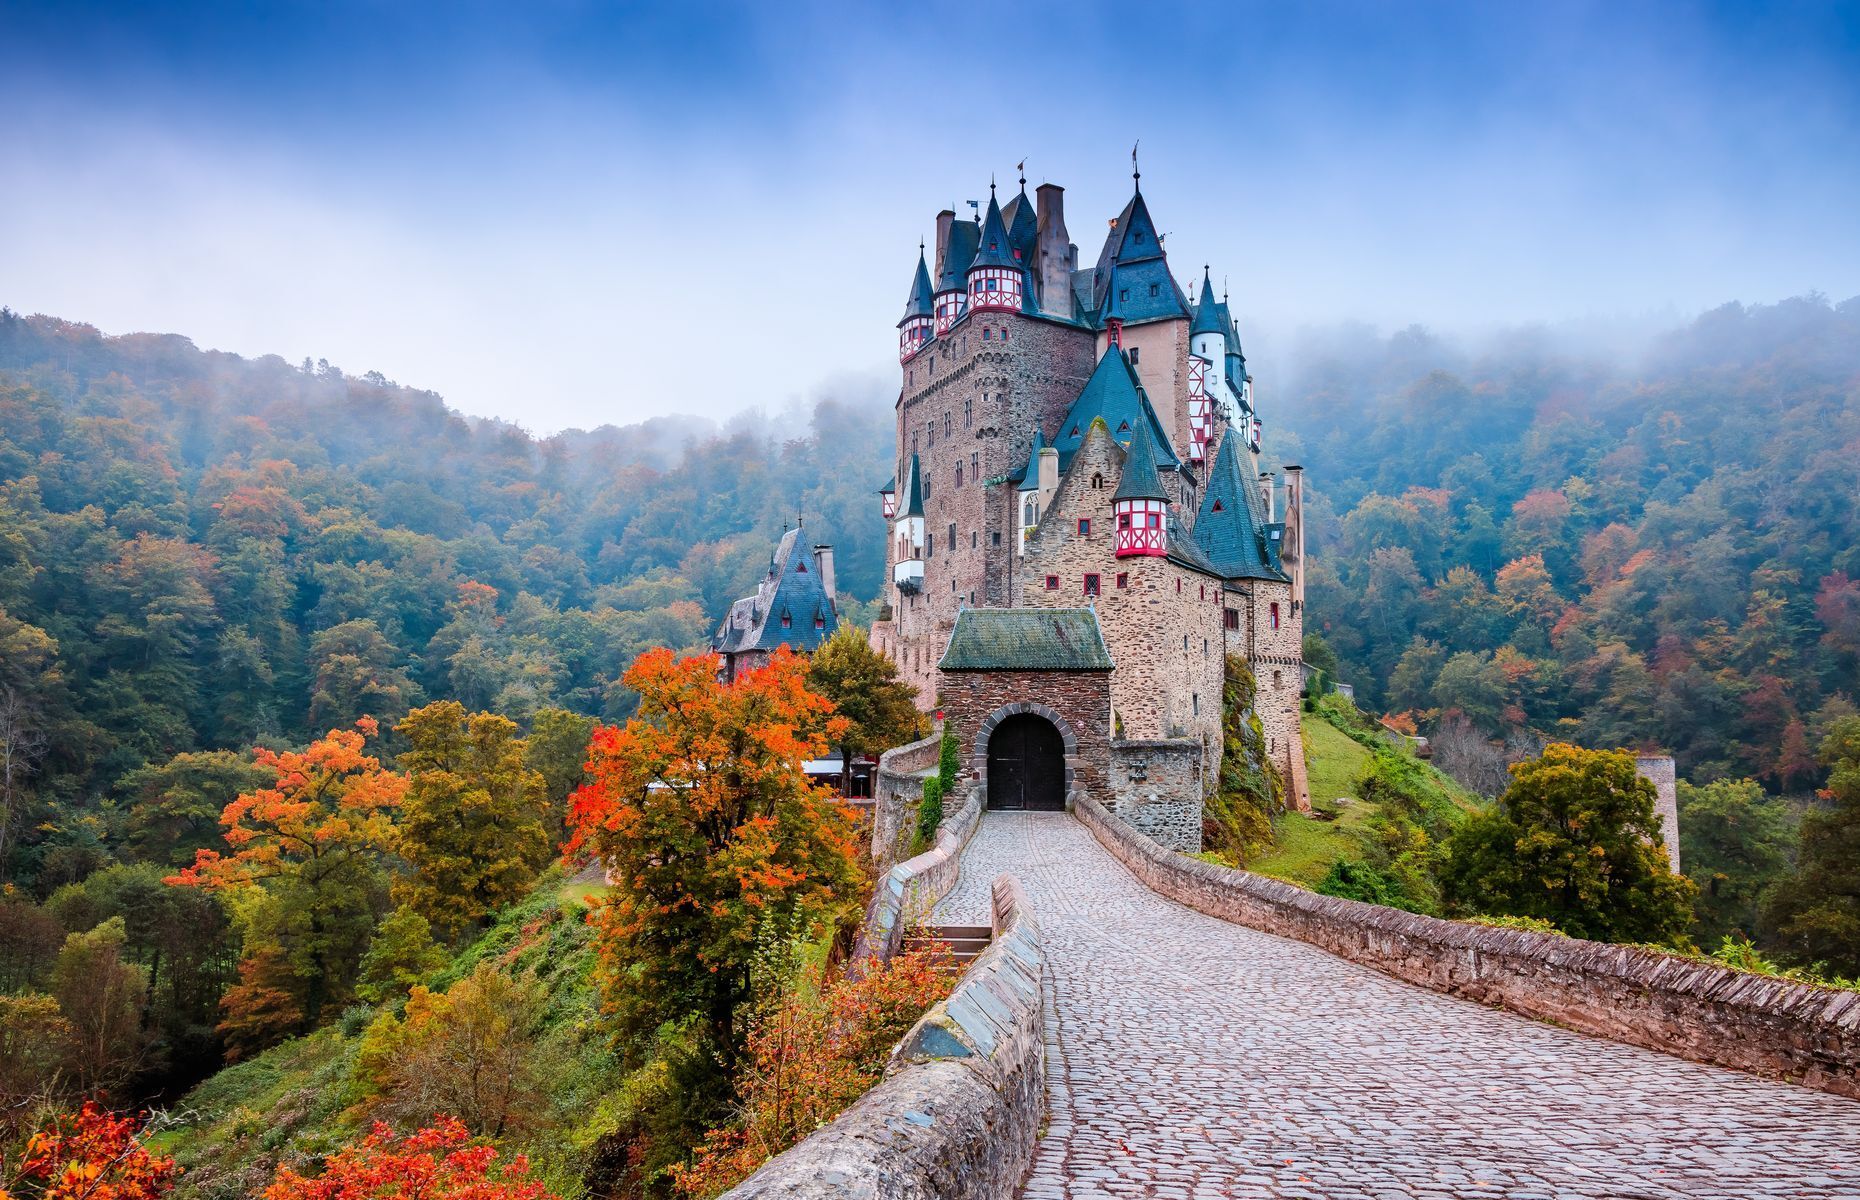 <a href="https://burg-eltz.de/en/homepage" rel="noreferrer noopener">Eltz</a> is one of the few castles in Germany that still belongs to the original family. In fact, 34 generations have lived there over the past 850 years. Open to the public from April to November, the castle that inspired Walt Disney’s setting for <em>Cinderella</em> (and its theme parks) is located in the heart of the Eltz Forest at the foot of the Elzbach River.